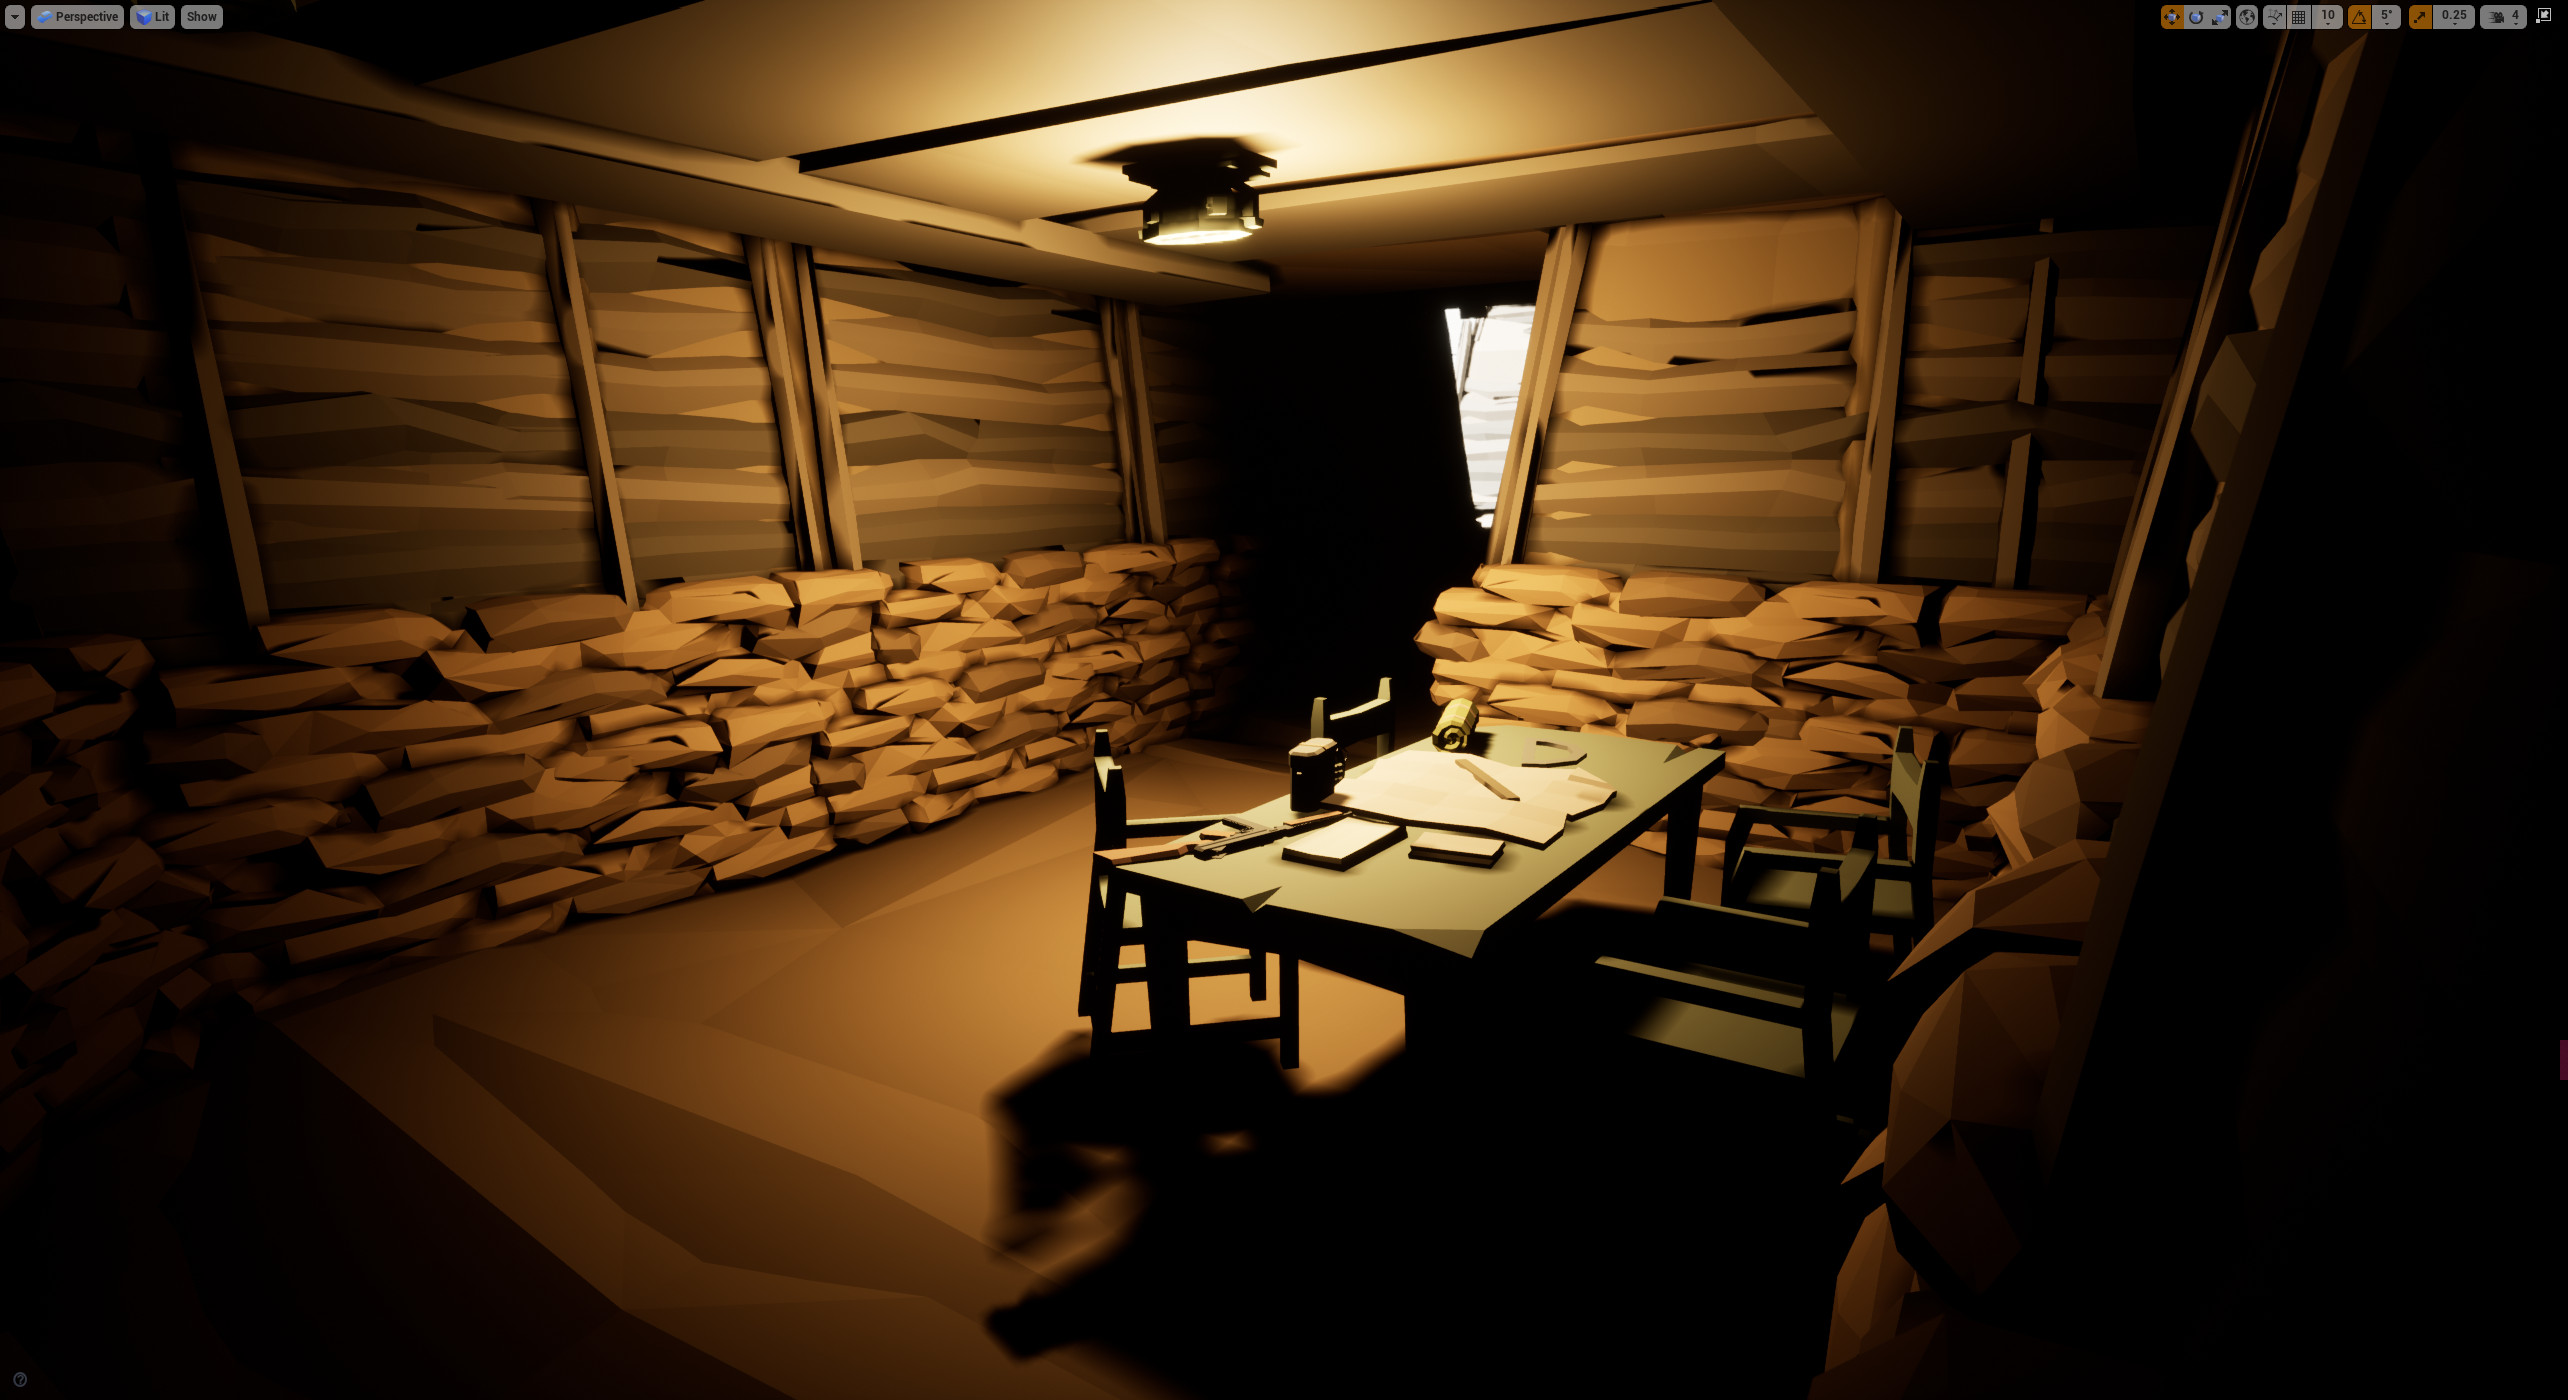 A small offshoot of the main trench area that offers the player some health, ammo, and collectible intel.